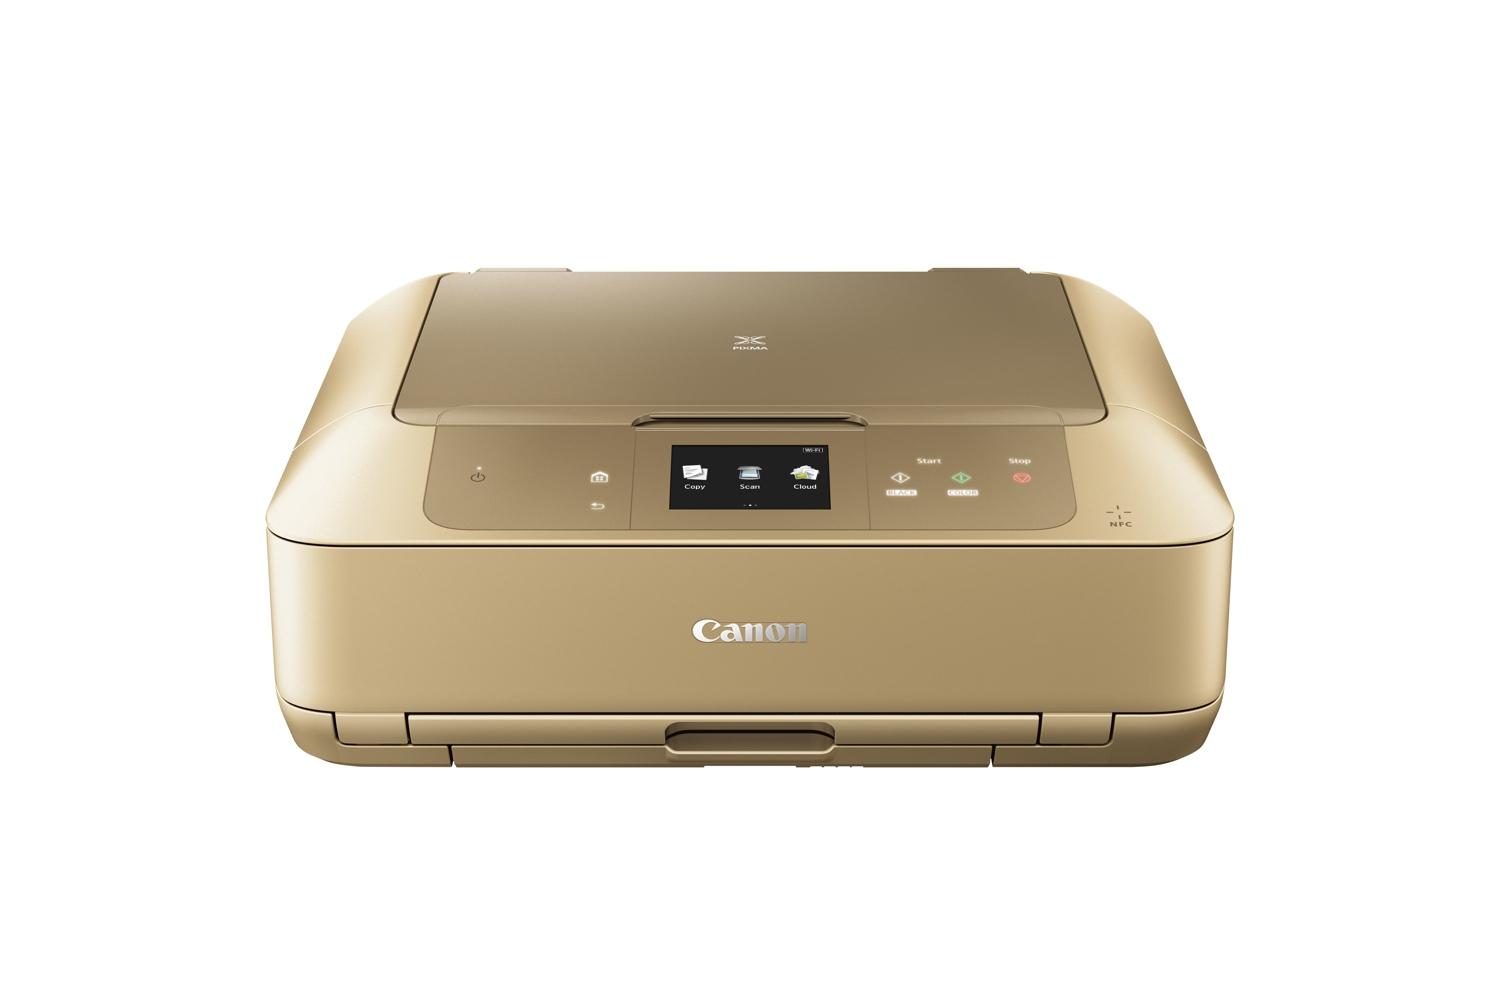 canons refreshed pixma photo inkjets use new inks print directly from instagram canon mg7720 gold